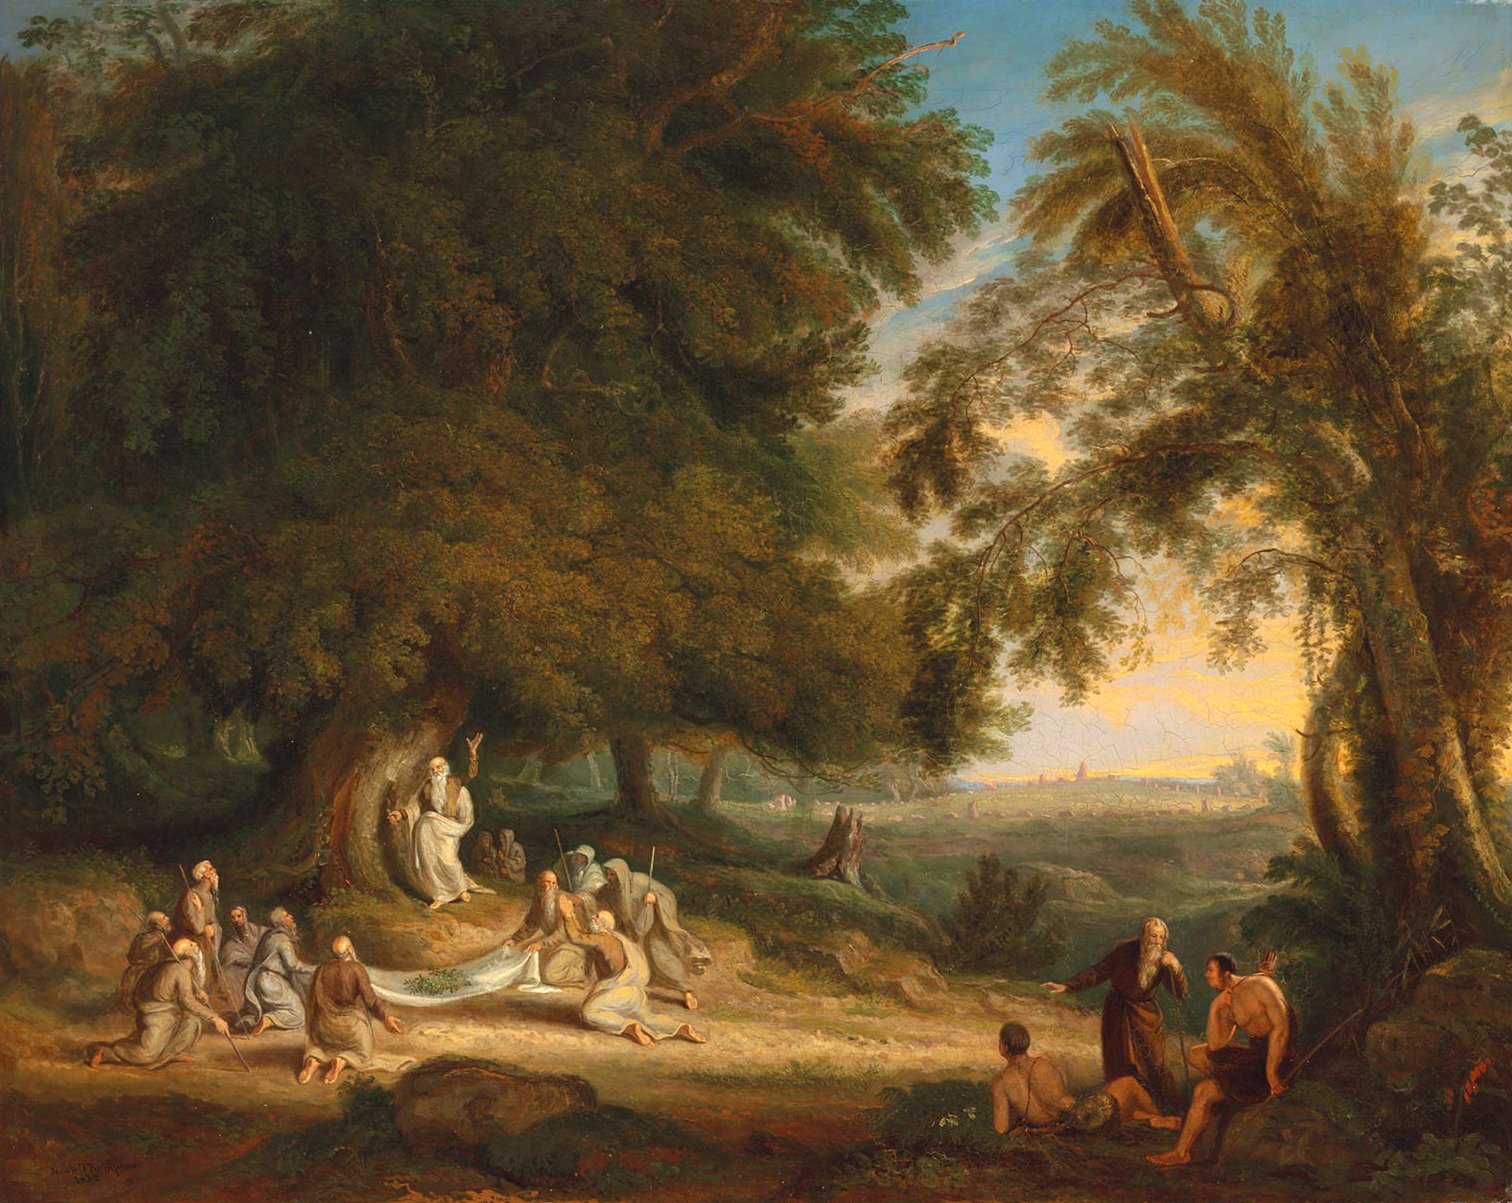 The Druids Collecting Mistletoe' by Jacob Thompson, depicting a scene of druids in traditional attire, gathering mistletoe from a sacred tree in a serene forest setting, evoking an atmosphere of ritual and reverence.